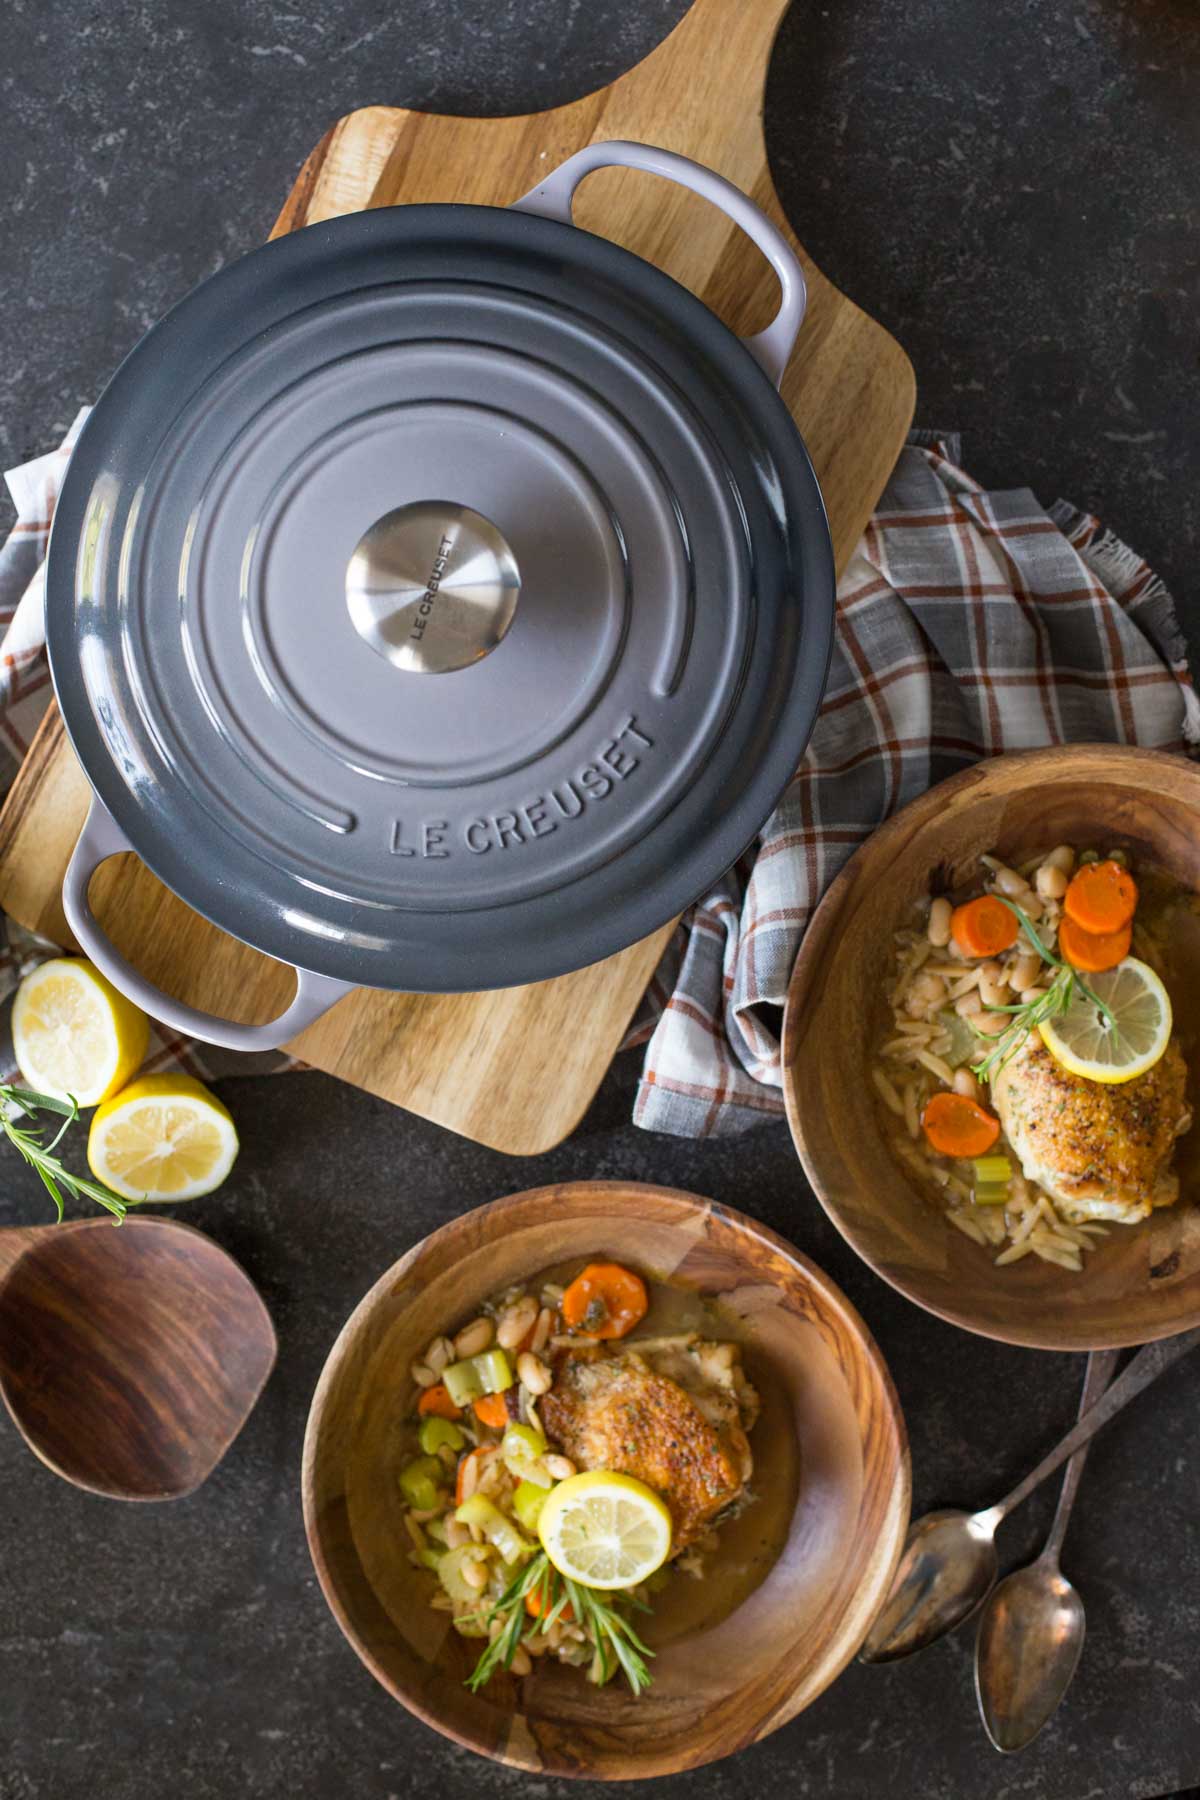 Rustic Lemon Rosemary Chicken and Orzo dished into two wood bowls, sitting next to a Le Creuset Dutch oven with the lid on. 